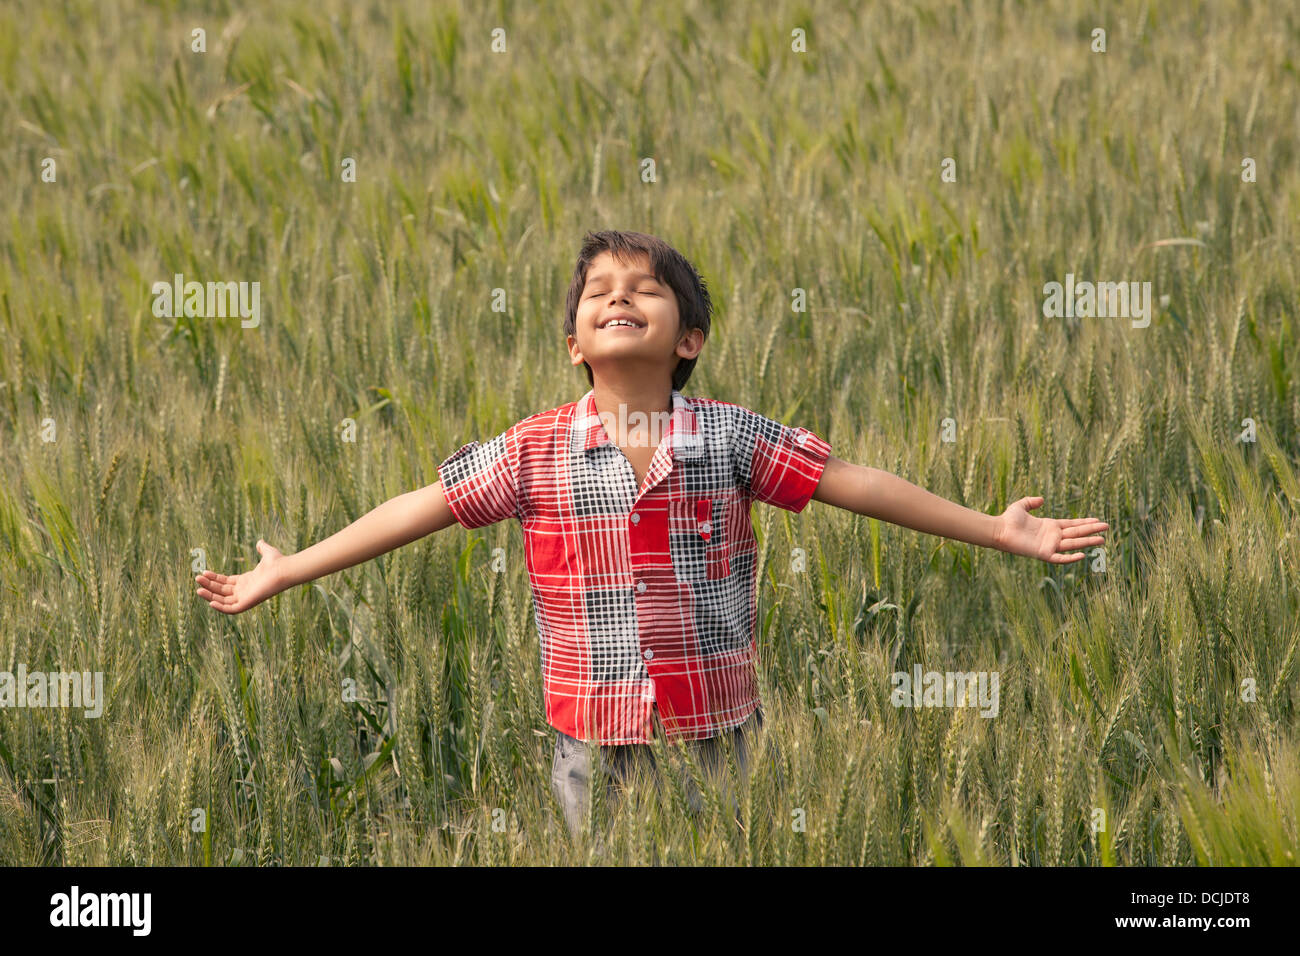 Little toddler standing in wheat field with arms out Stock Photo